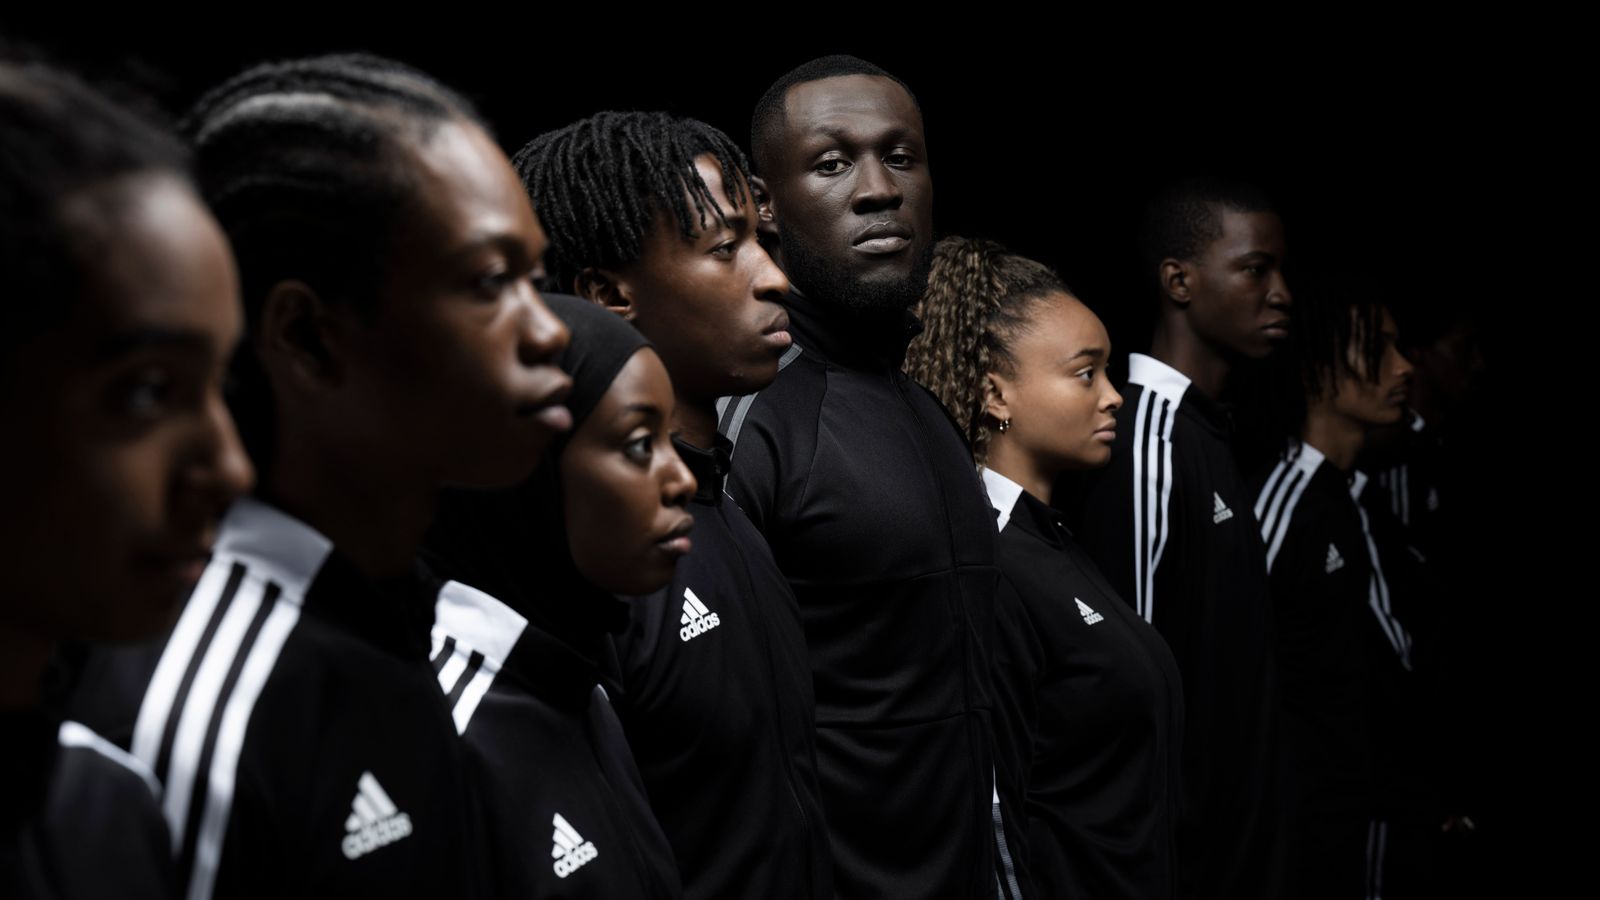 stormzy-exclusive-interview-rapper-launches-merky-fc-to-fight-racial-inequality-in-football